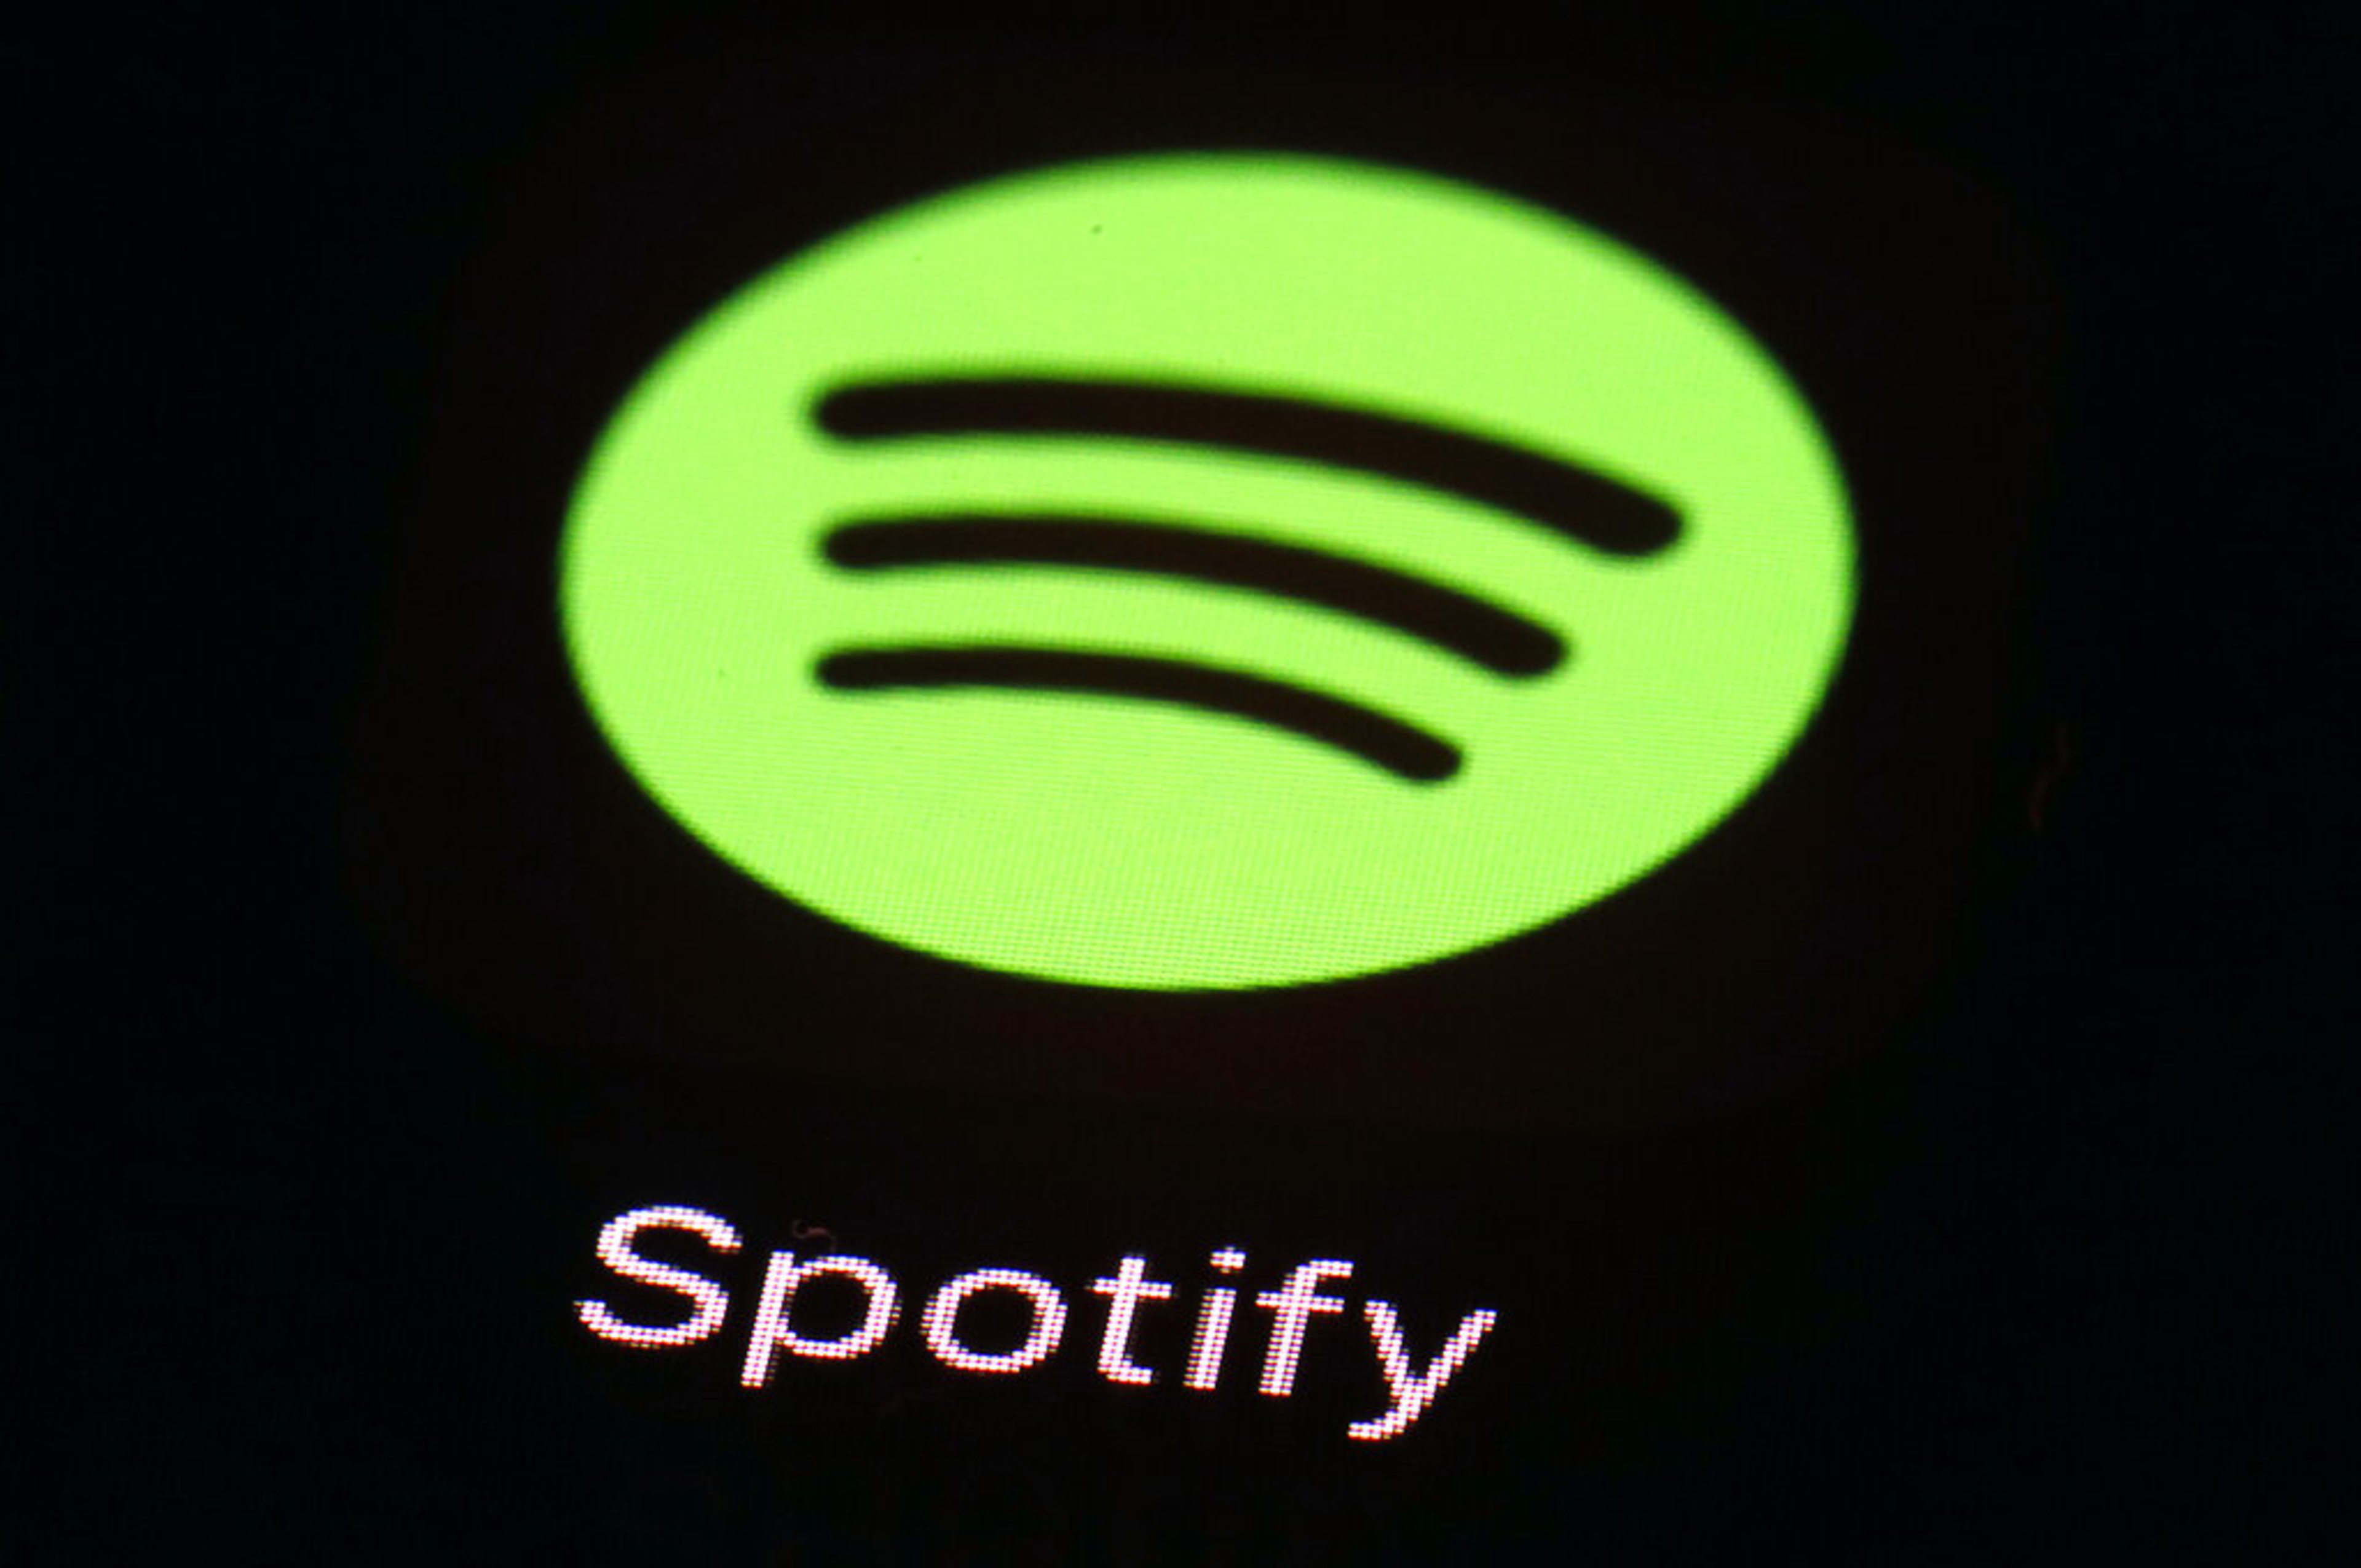 Spotify job cuts announced this week in tech sector’s latest round of mass layoffs